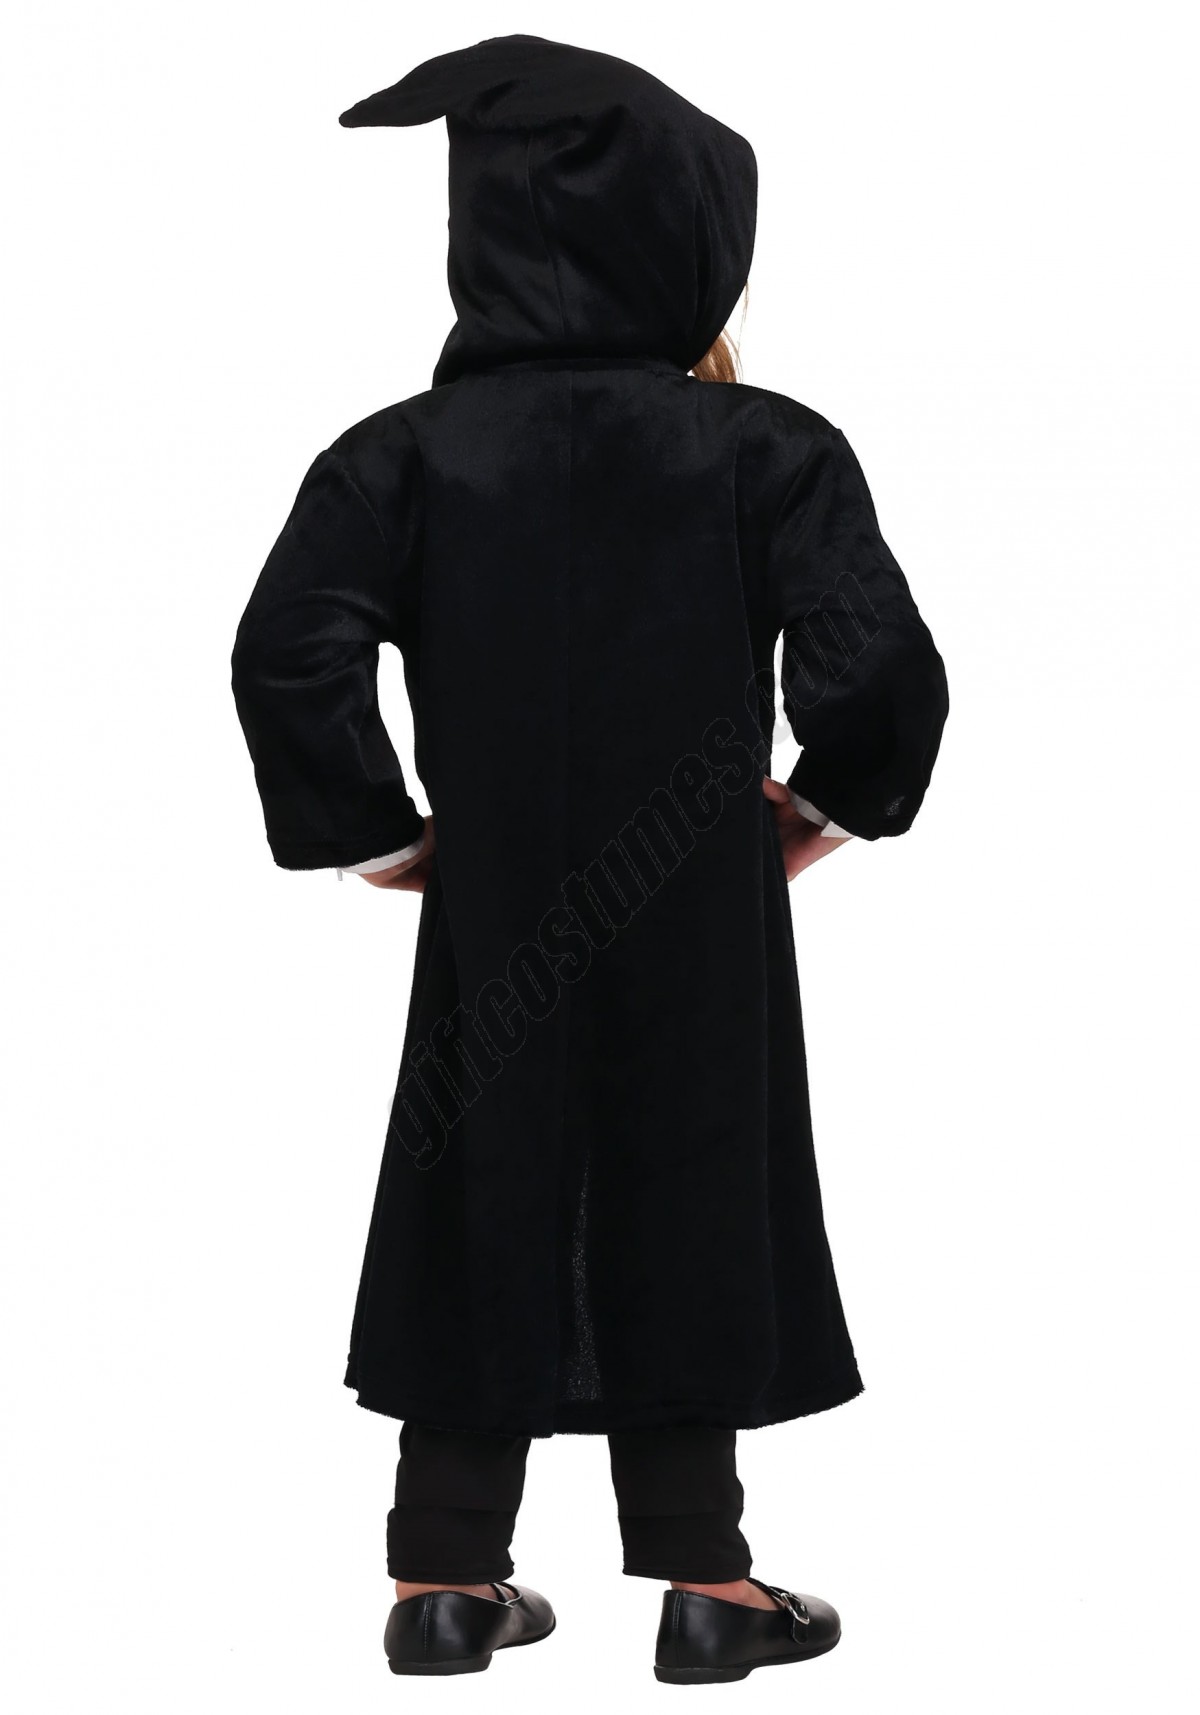 Harry Potter Kids Deluxe Ravenclaw Robe Costume Promotions - -3